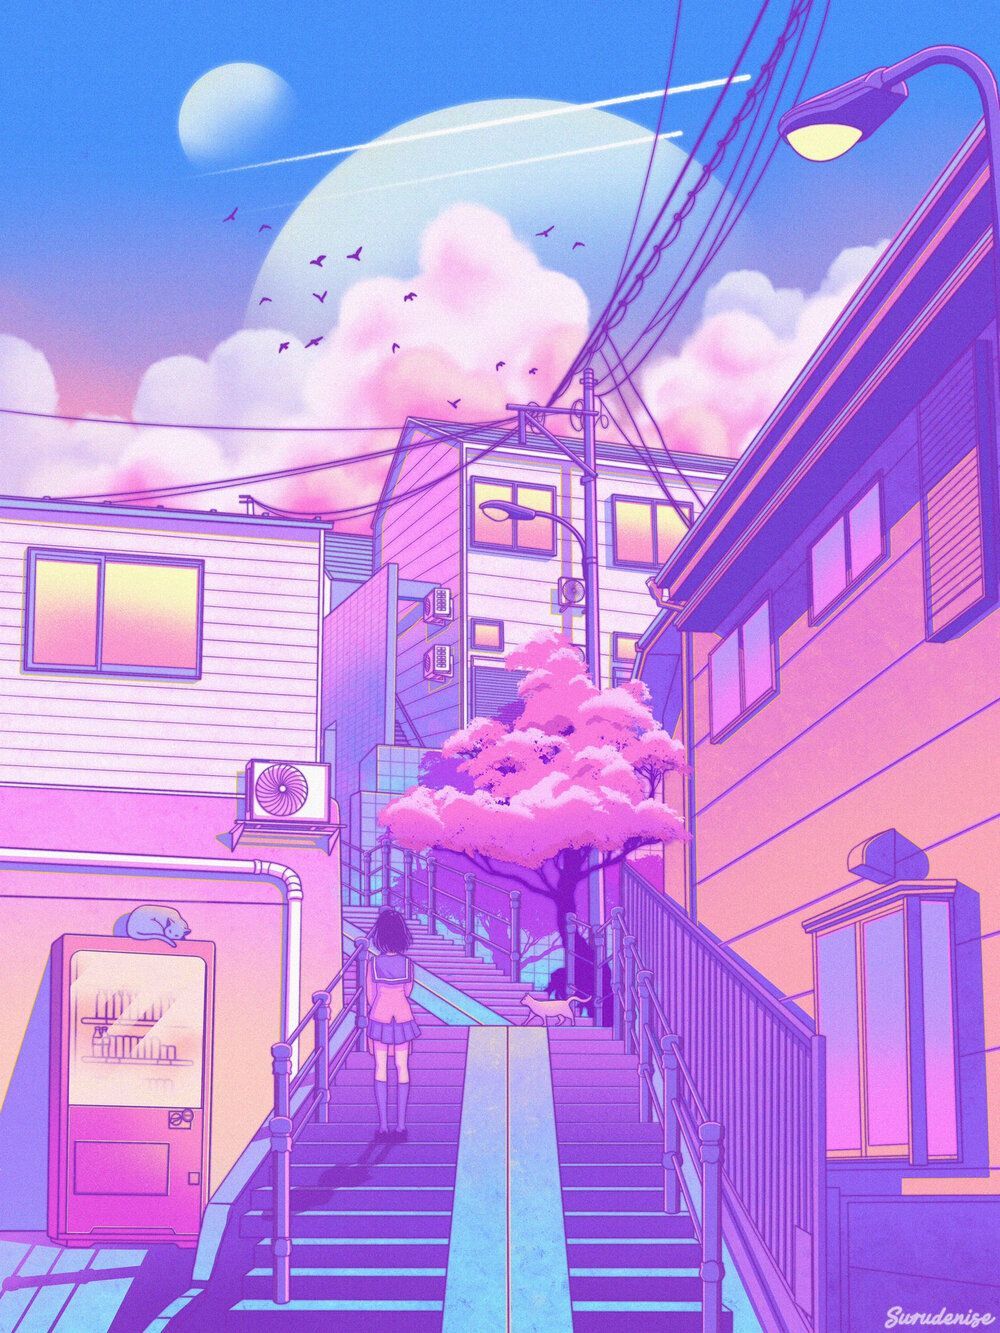 Aesthetic anime background of a girl walking down stairs - Japan, Japanese